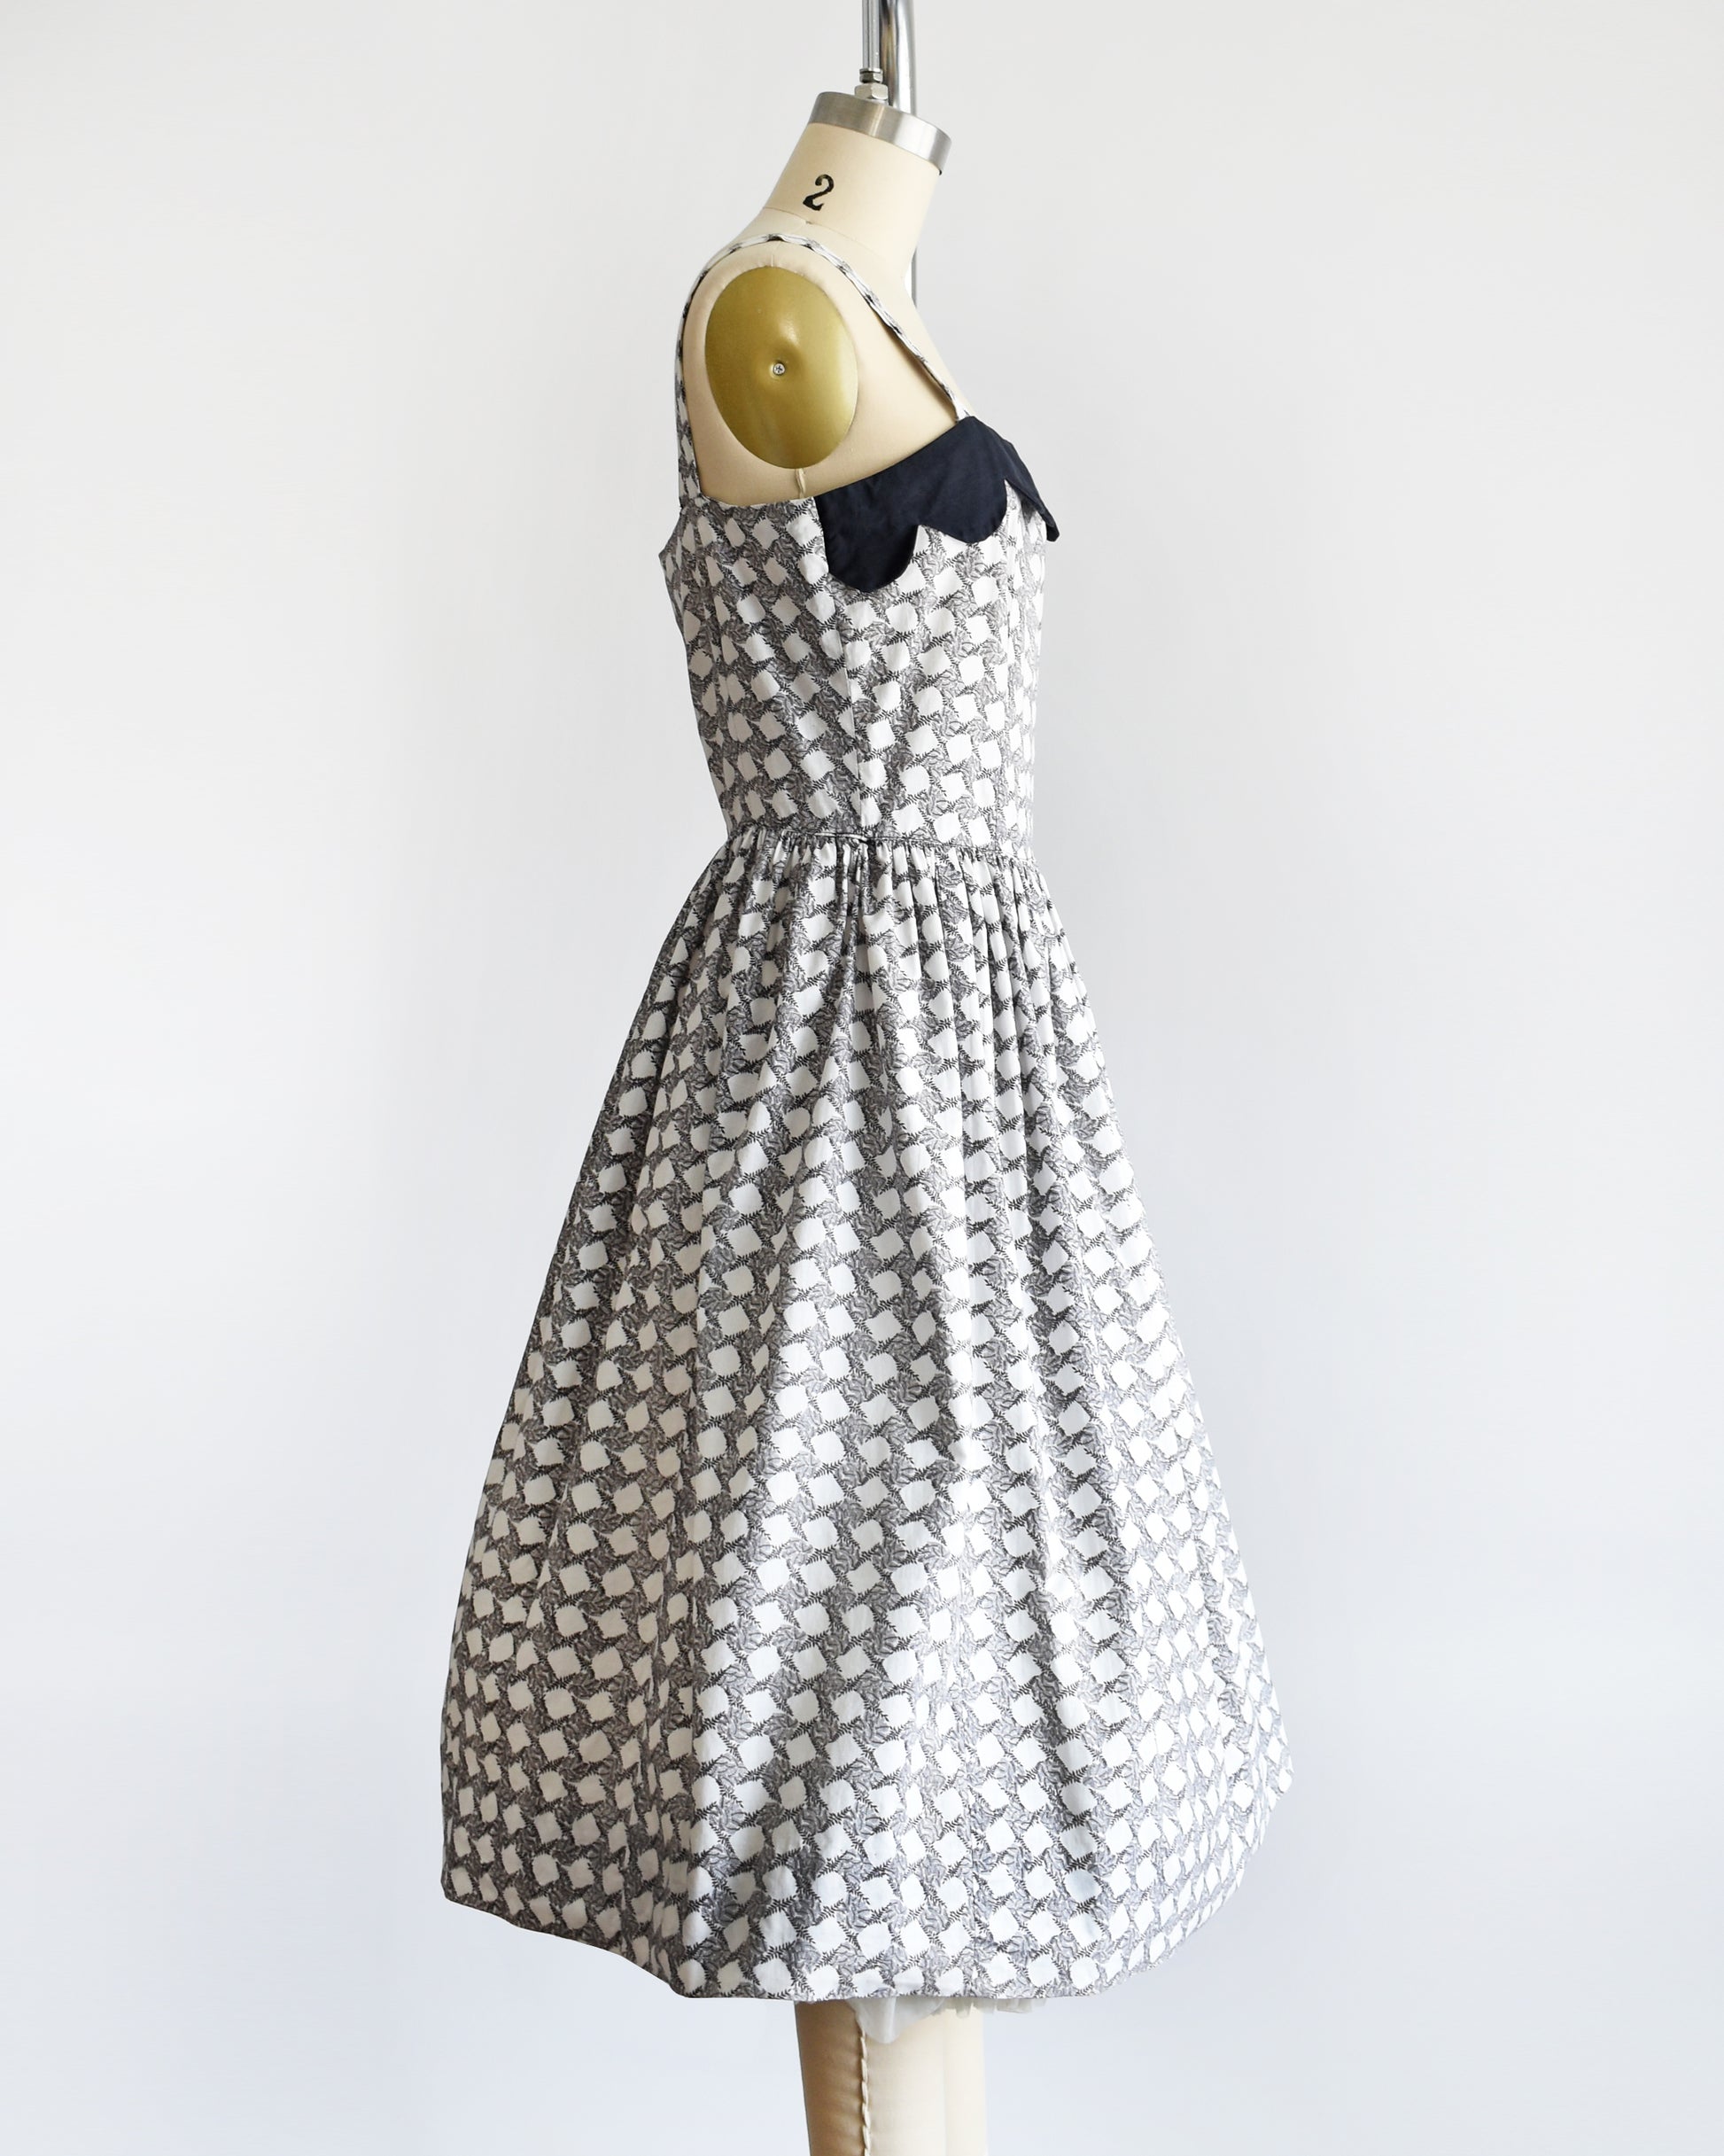 Side view of a vintage 1950s white dress with a  black fern motif that forms a diamond print. The dress has a black scalloped neckline and fit and flare skirt.